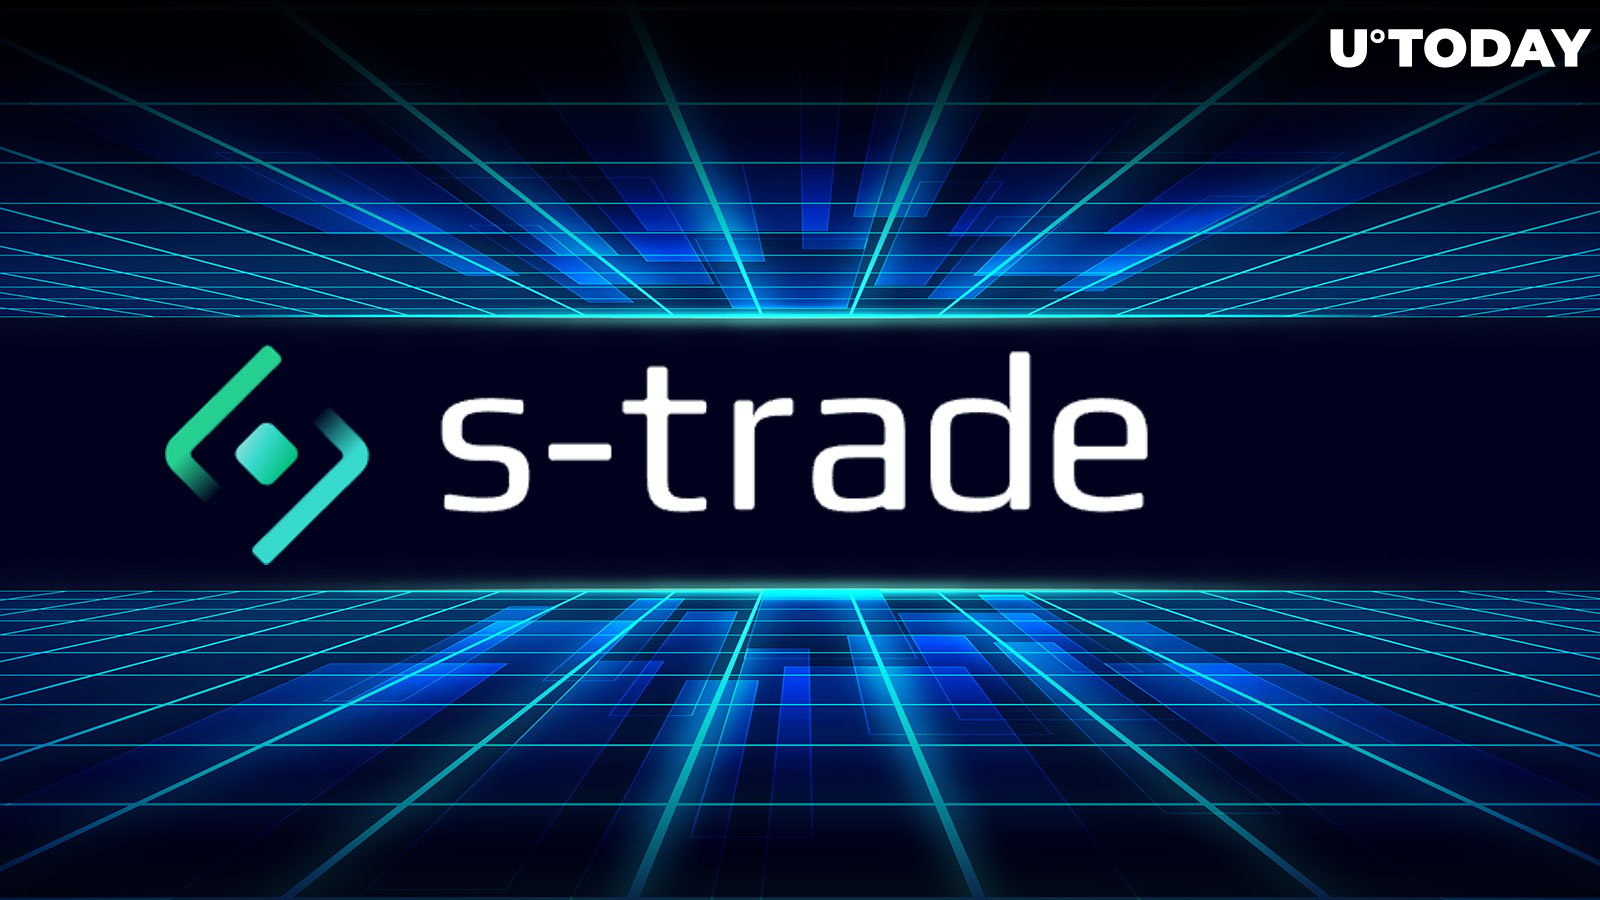 S-Trade Streamlines Operations for Traders and Investors